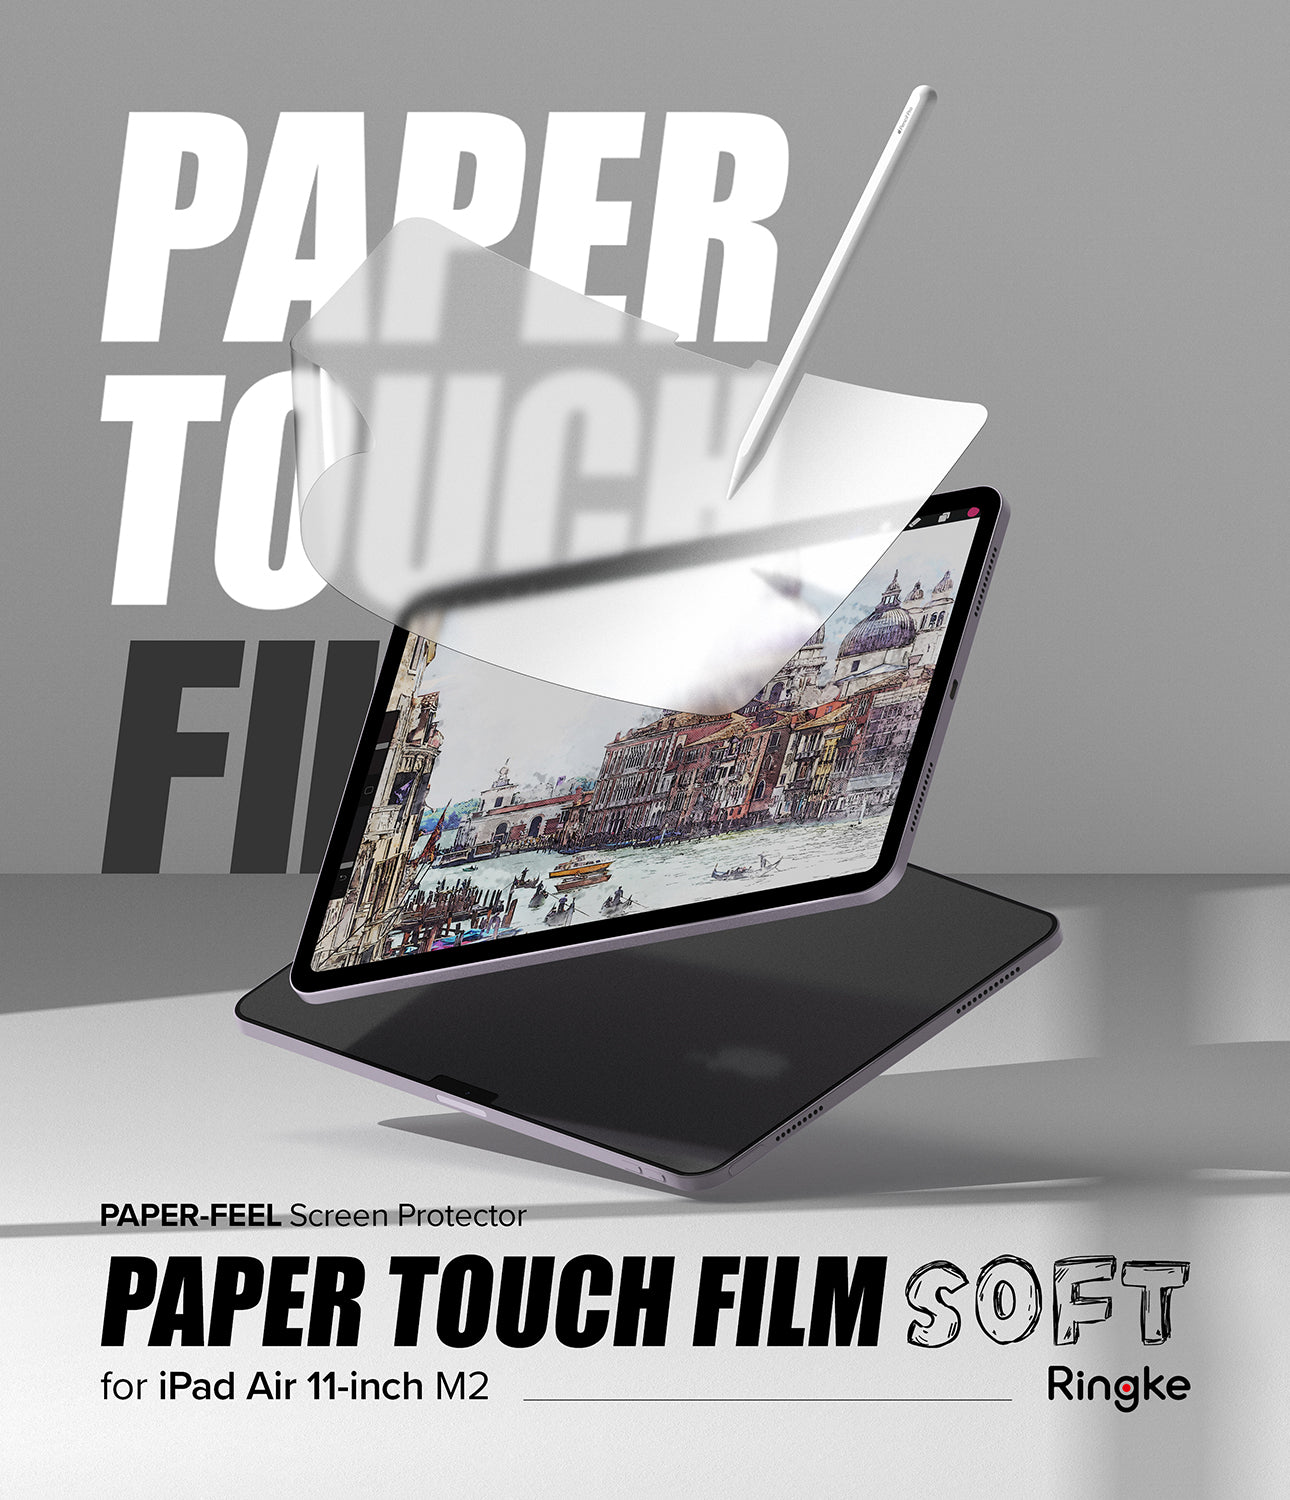 iPad Air 11" (M2) Screen Protector | Paper Touch Film - Soft - By Ringke